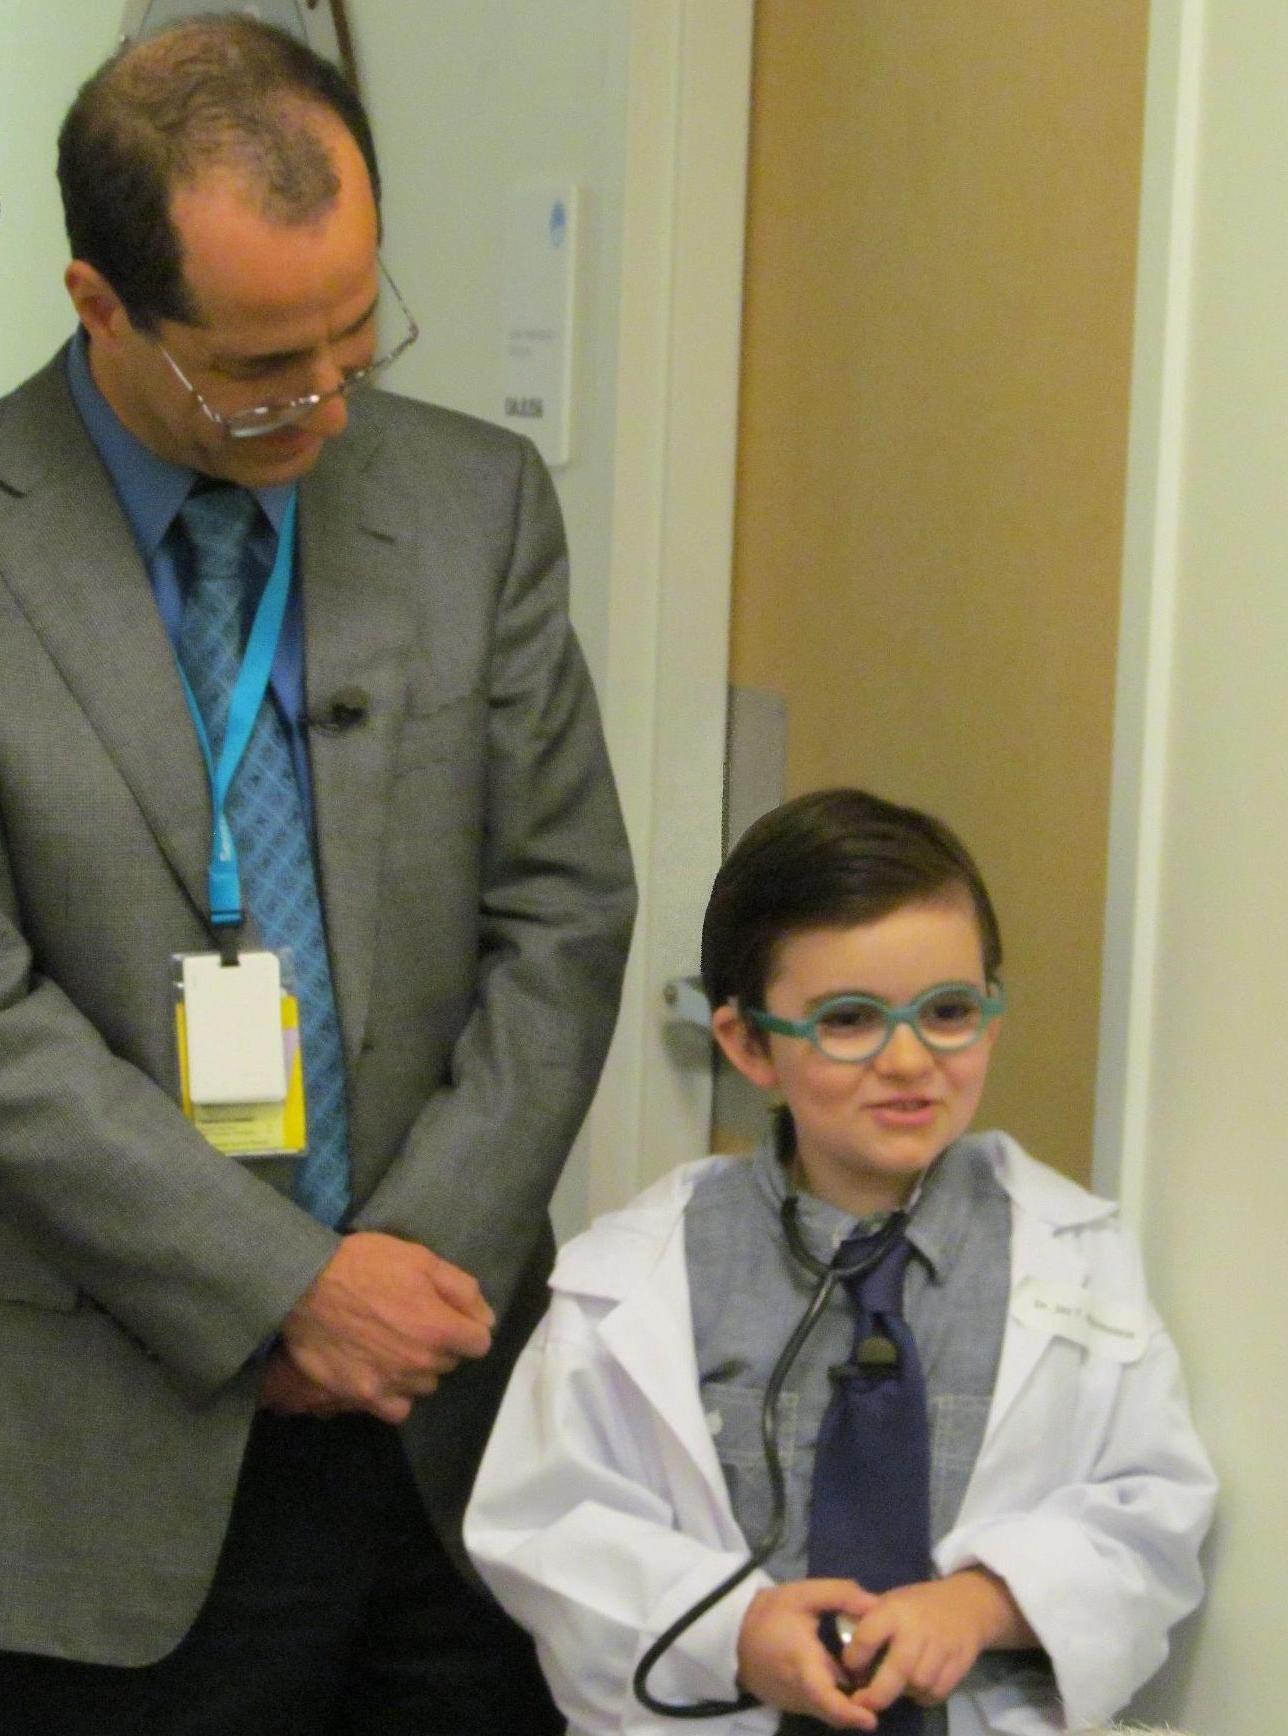 Photo of a tall man in glasses wearing a tie looking down at a young boy wearing play glasses, a tie, a white coat, and a stethoscope.